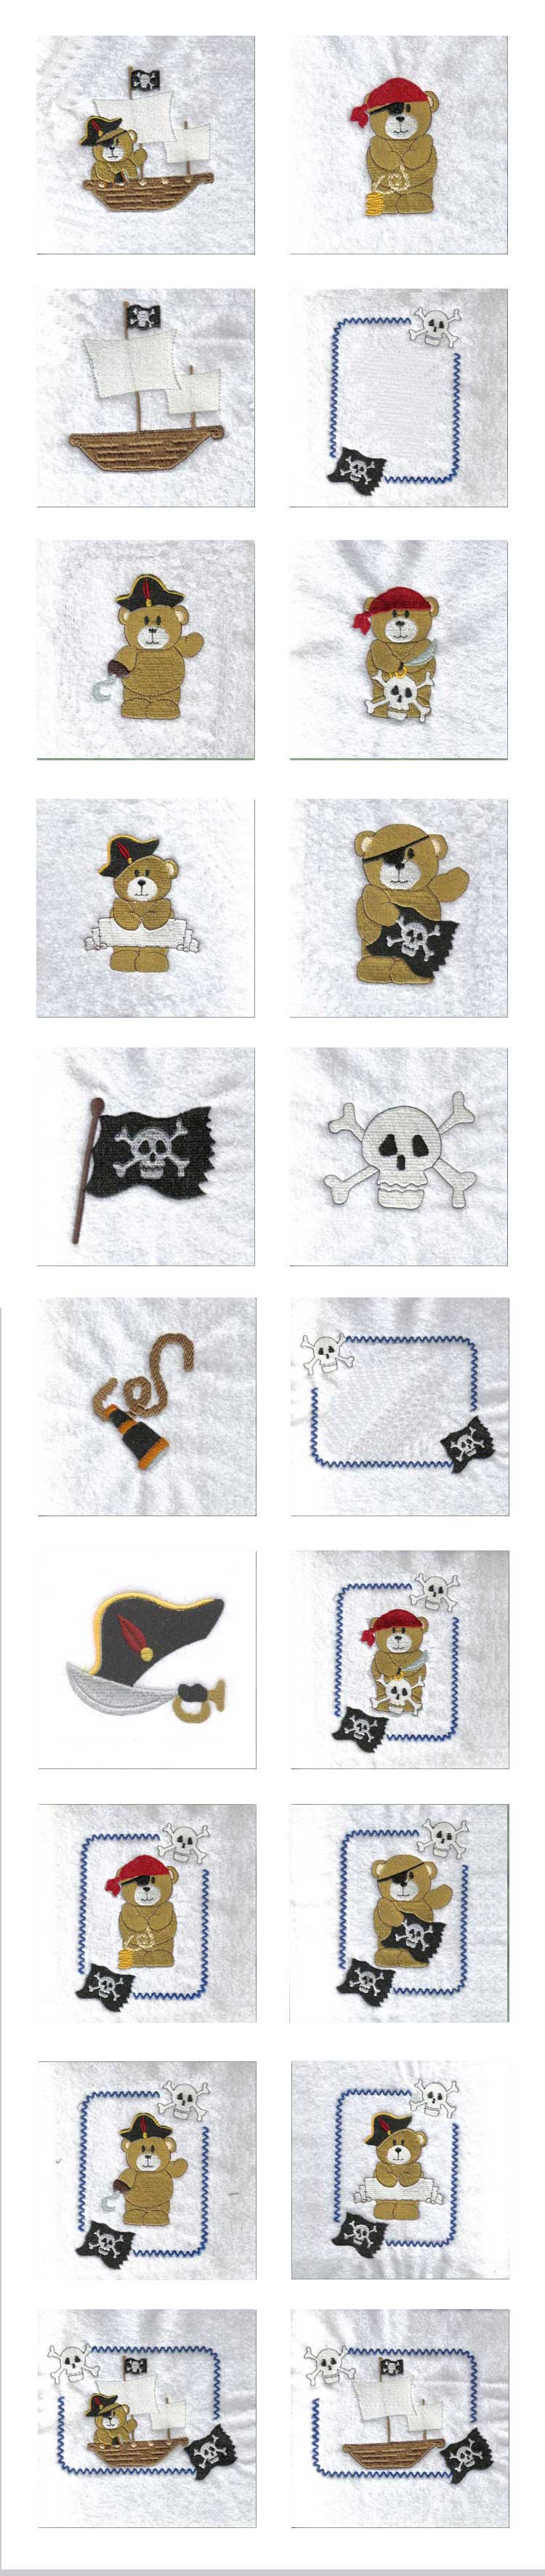 Pirate Bears Embroidery Machine Design Details